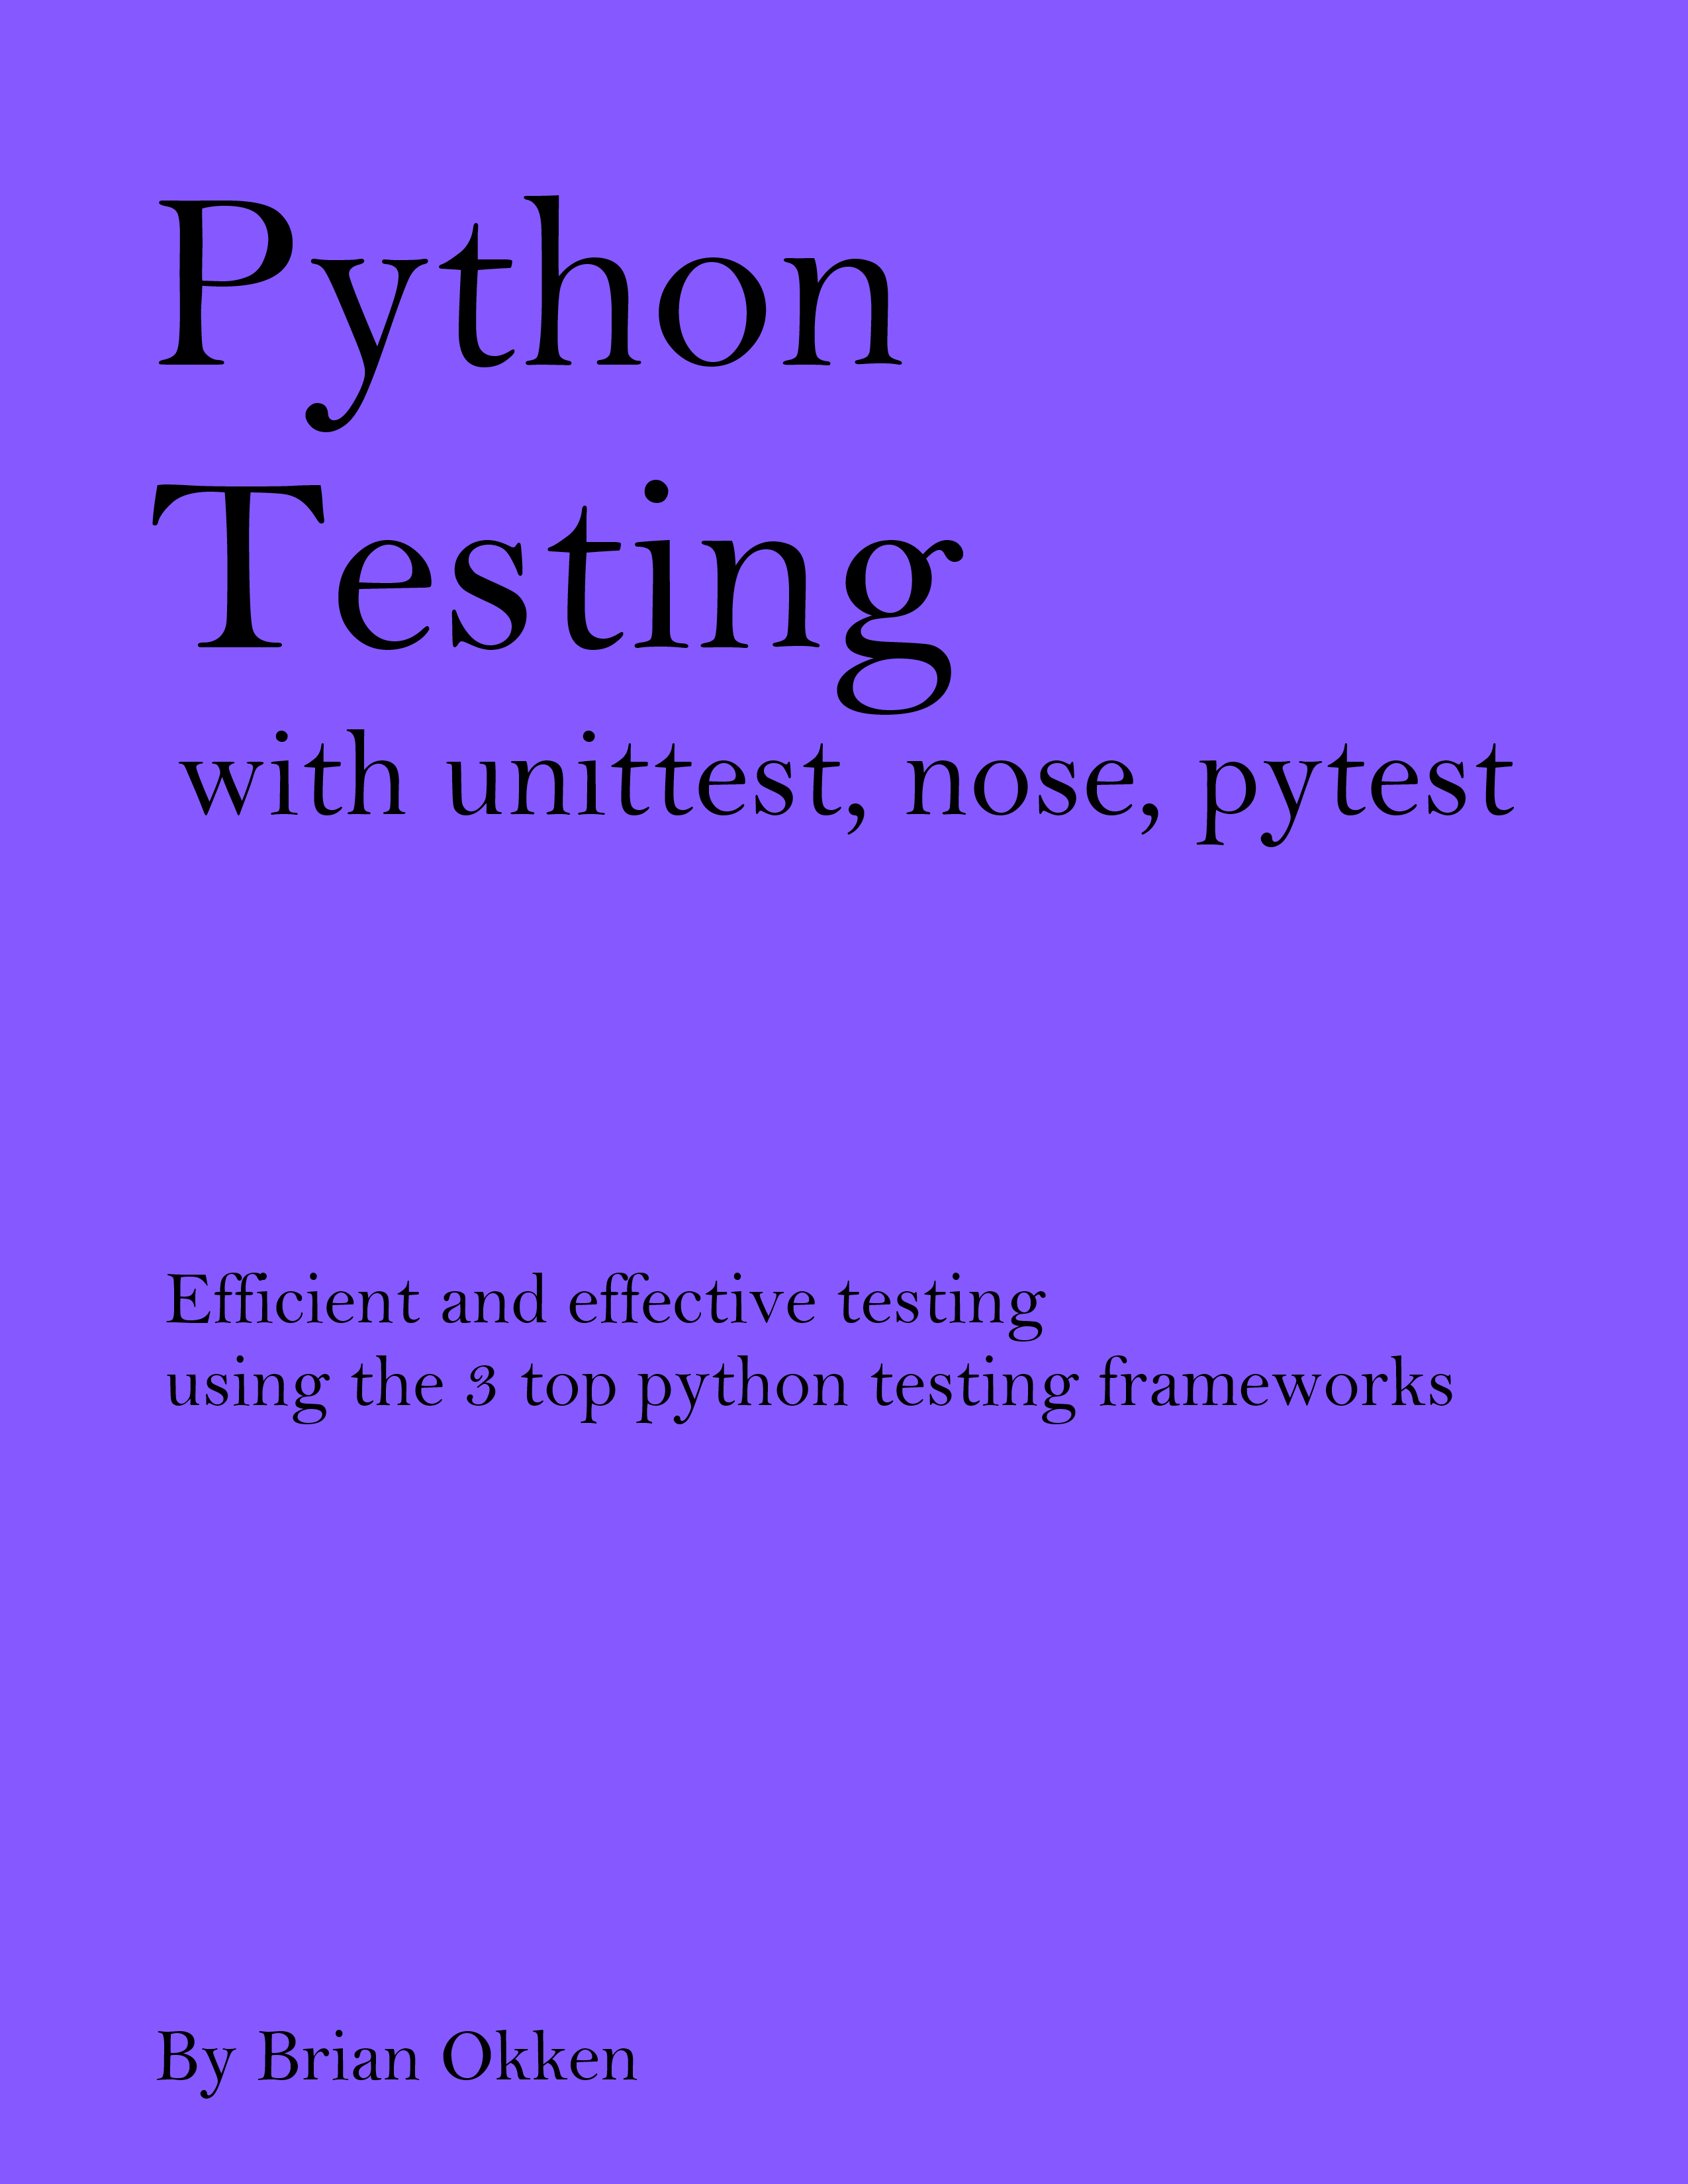 Python Testing with unittest, nose, pytest by Brian Okken